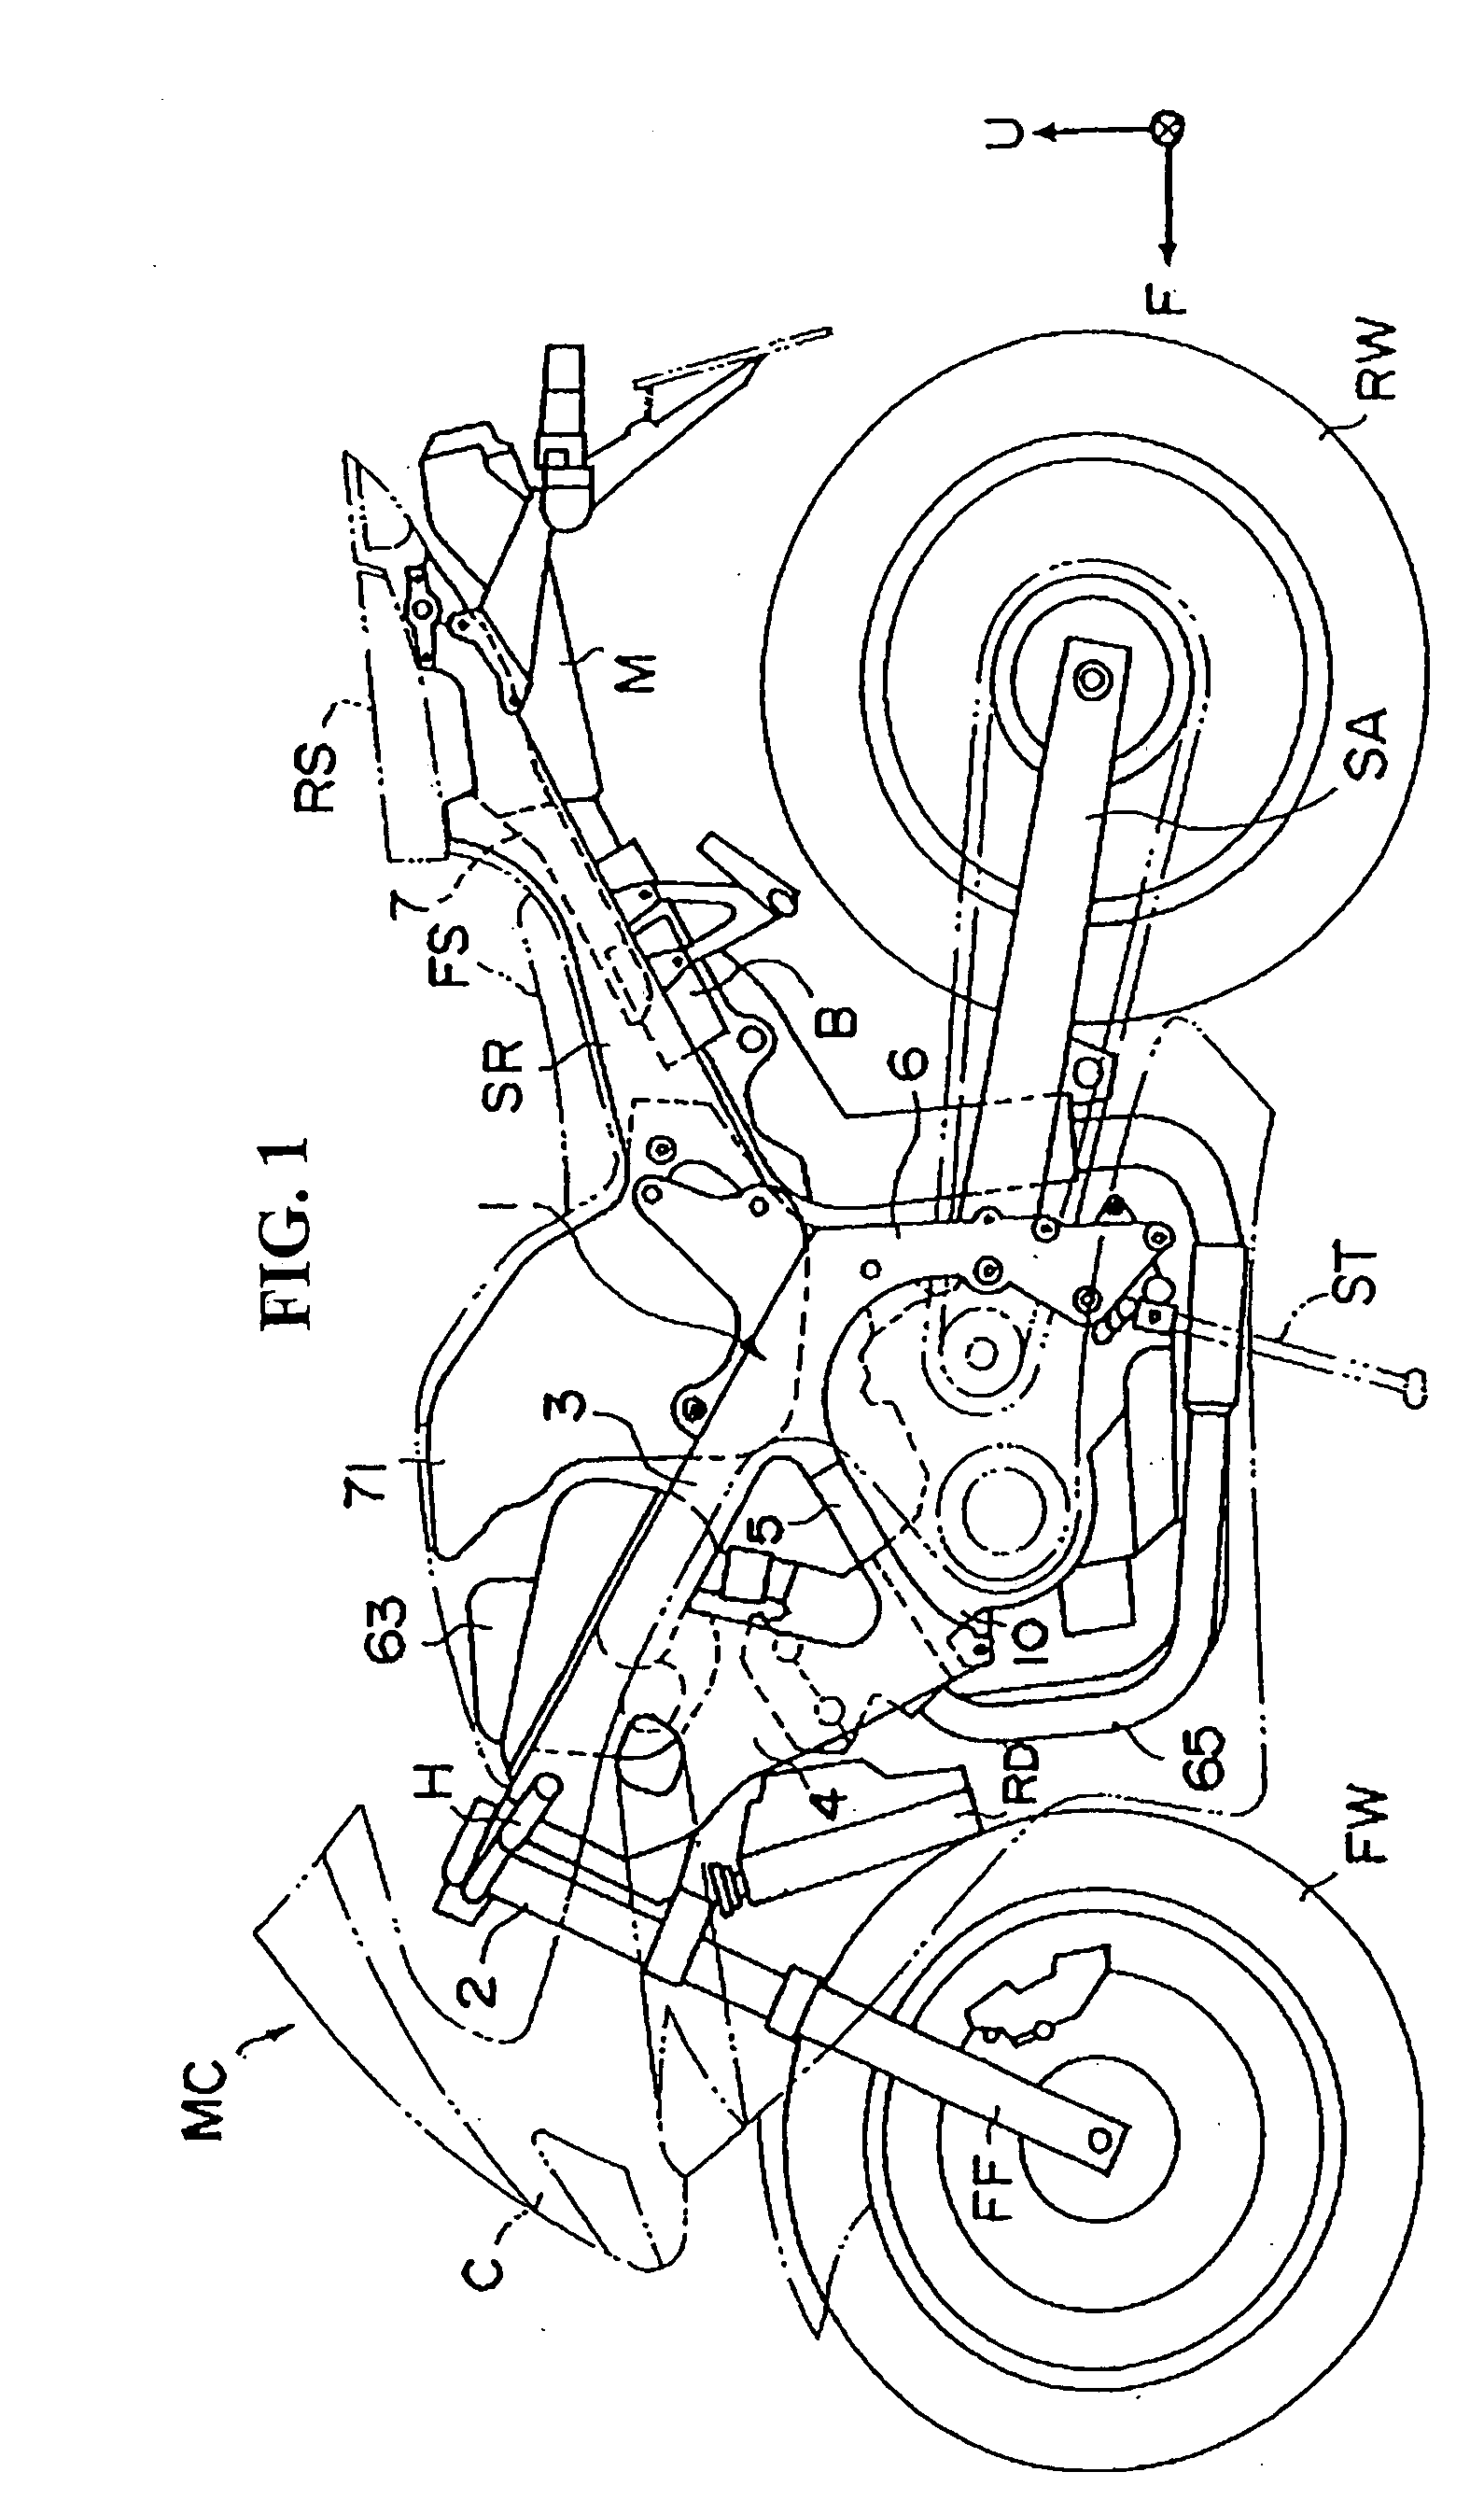 Internal combustion engine having improved fuel pump configuration, and vehicle including same